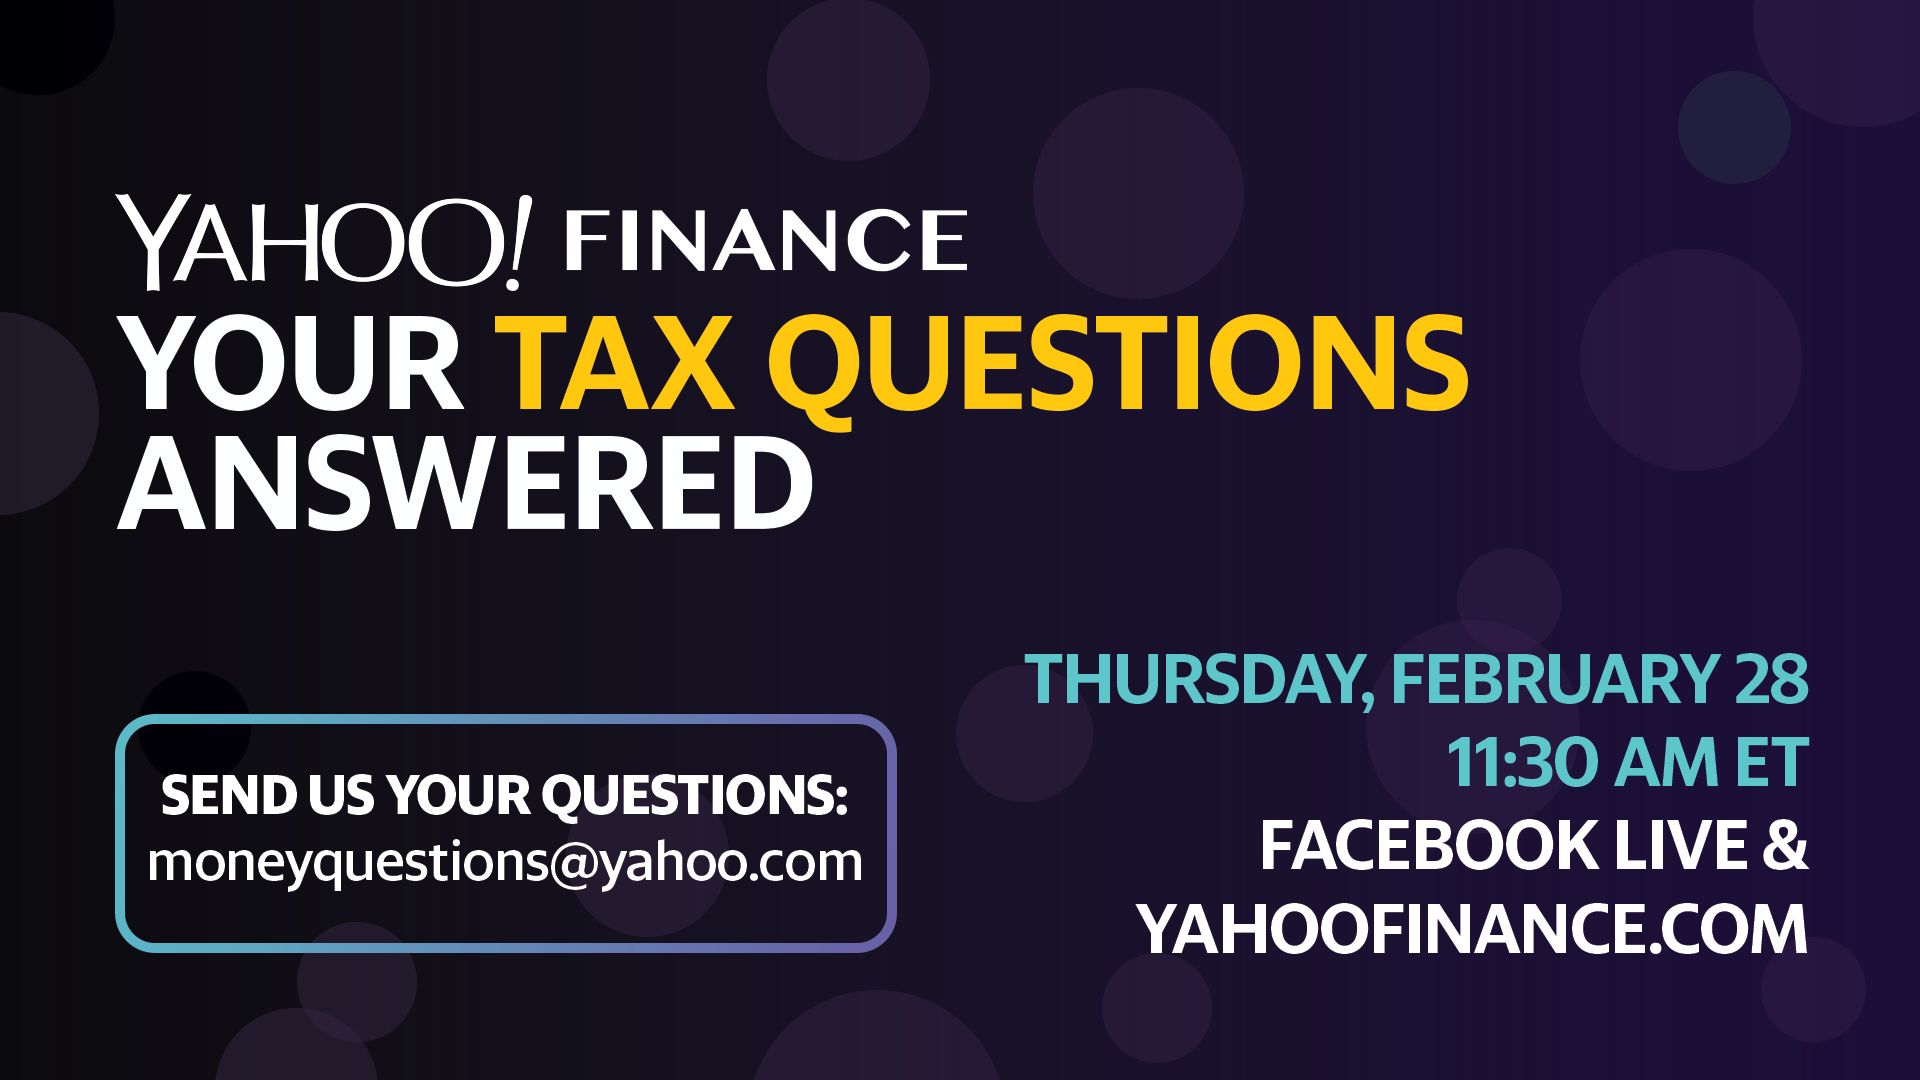 Log in at 11:30 am EST on the 28/02/2019 for the Yahoo Finance Live Tax FAQ session to get all the answers you need. 